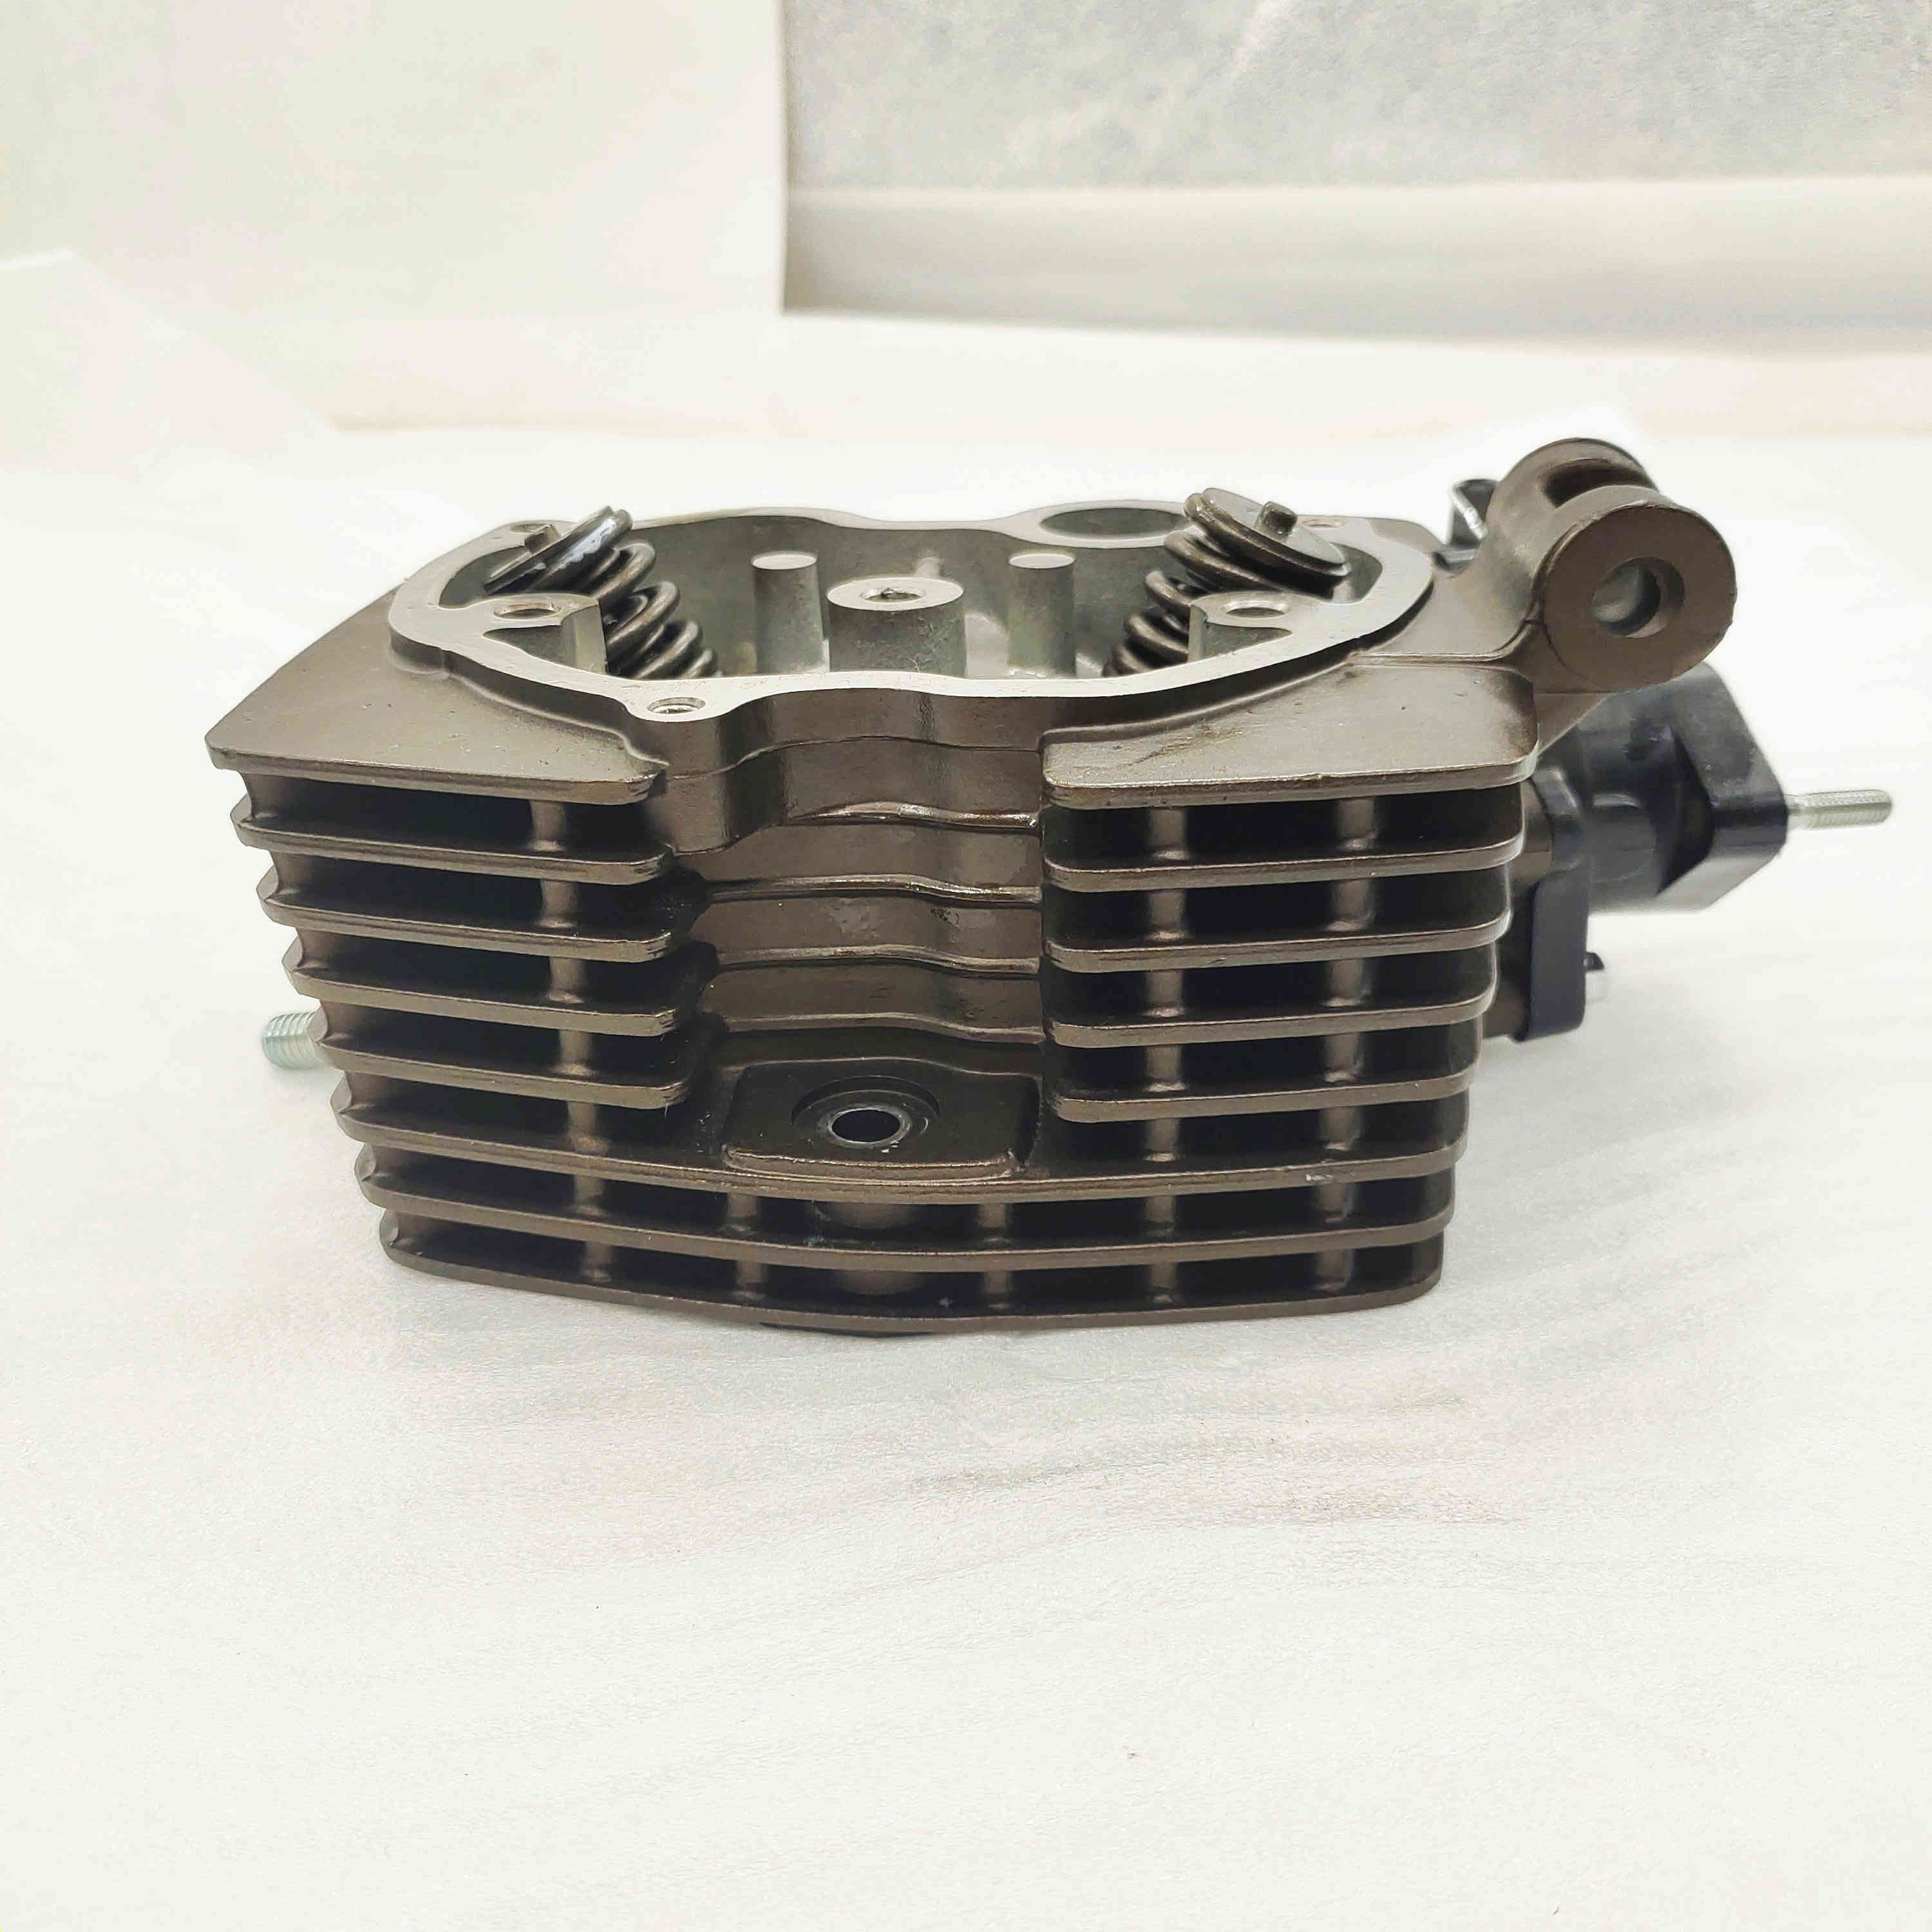 DAYANG hot sale motorcycle spare parts tricycle LIFAN150 air-cooled engine cylinder head custom origin type for adult